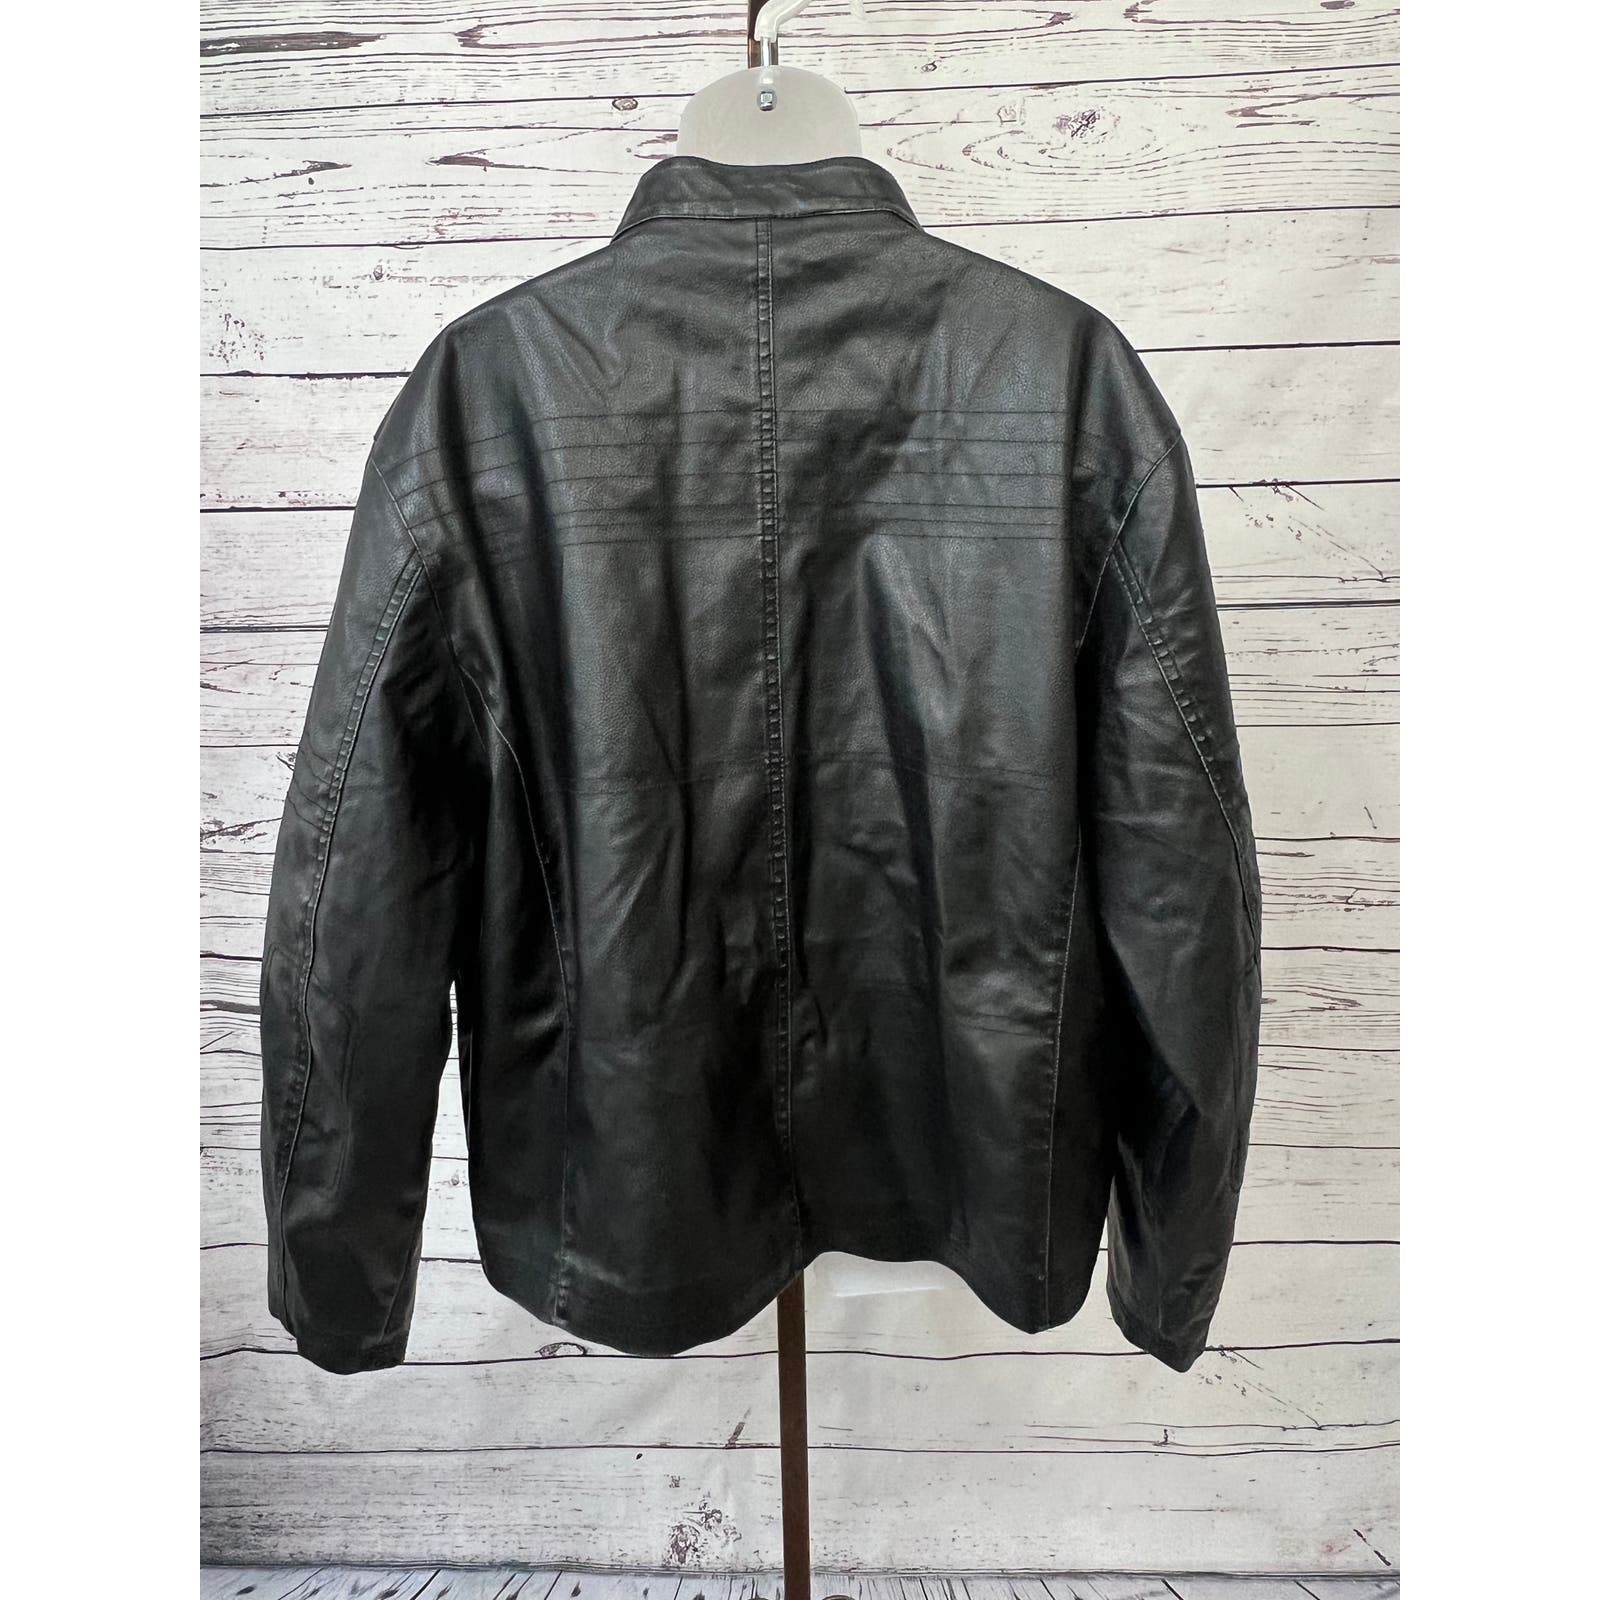 Whispering Smith Motorcycle Jacket Mens XXL Faux Leather Black Distressed Moto